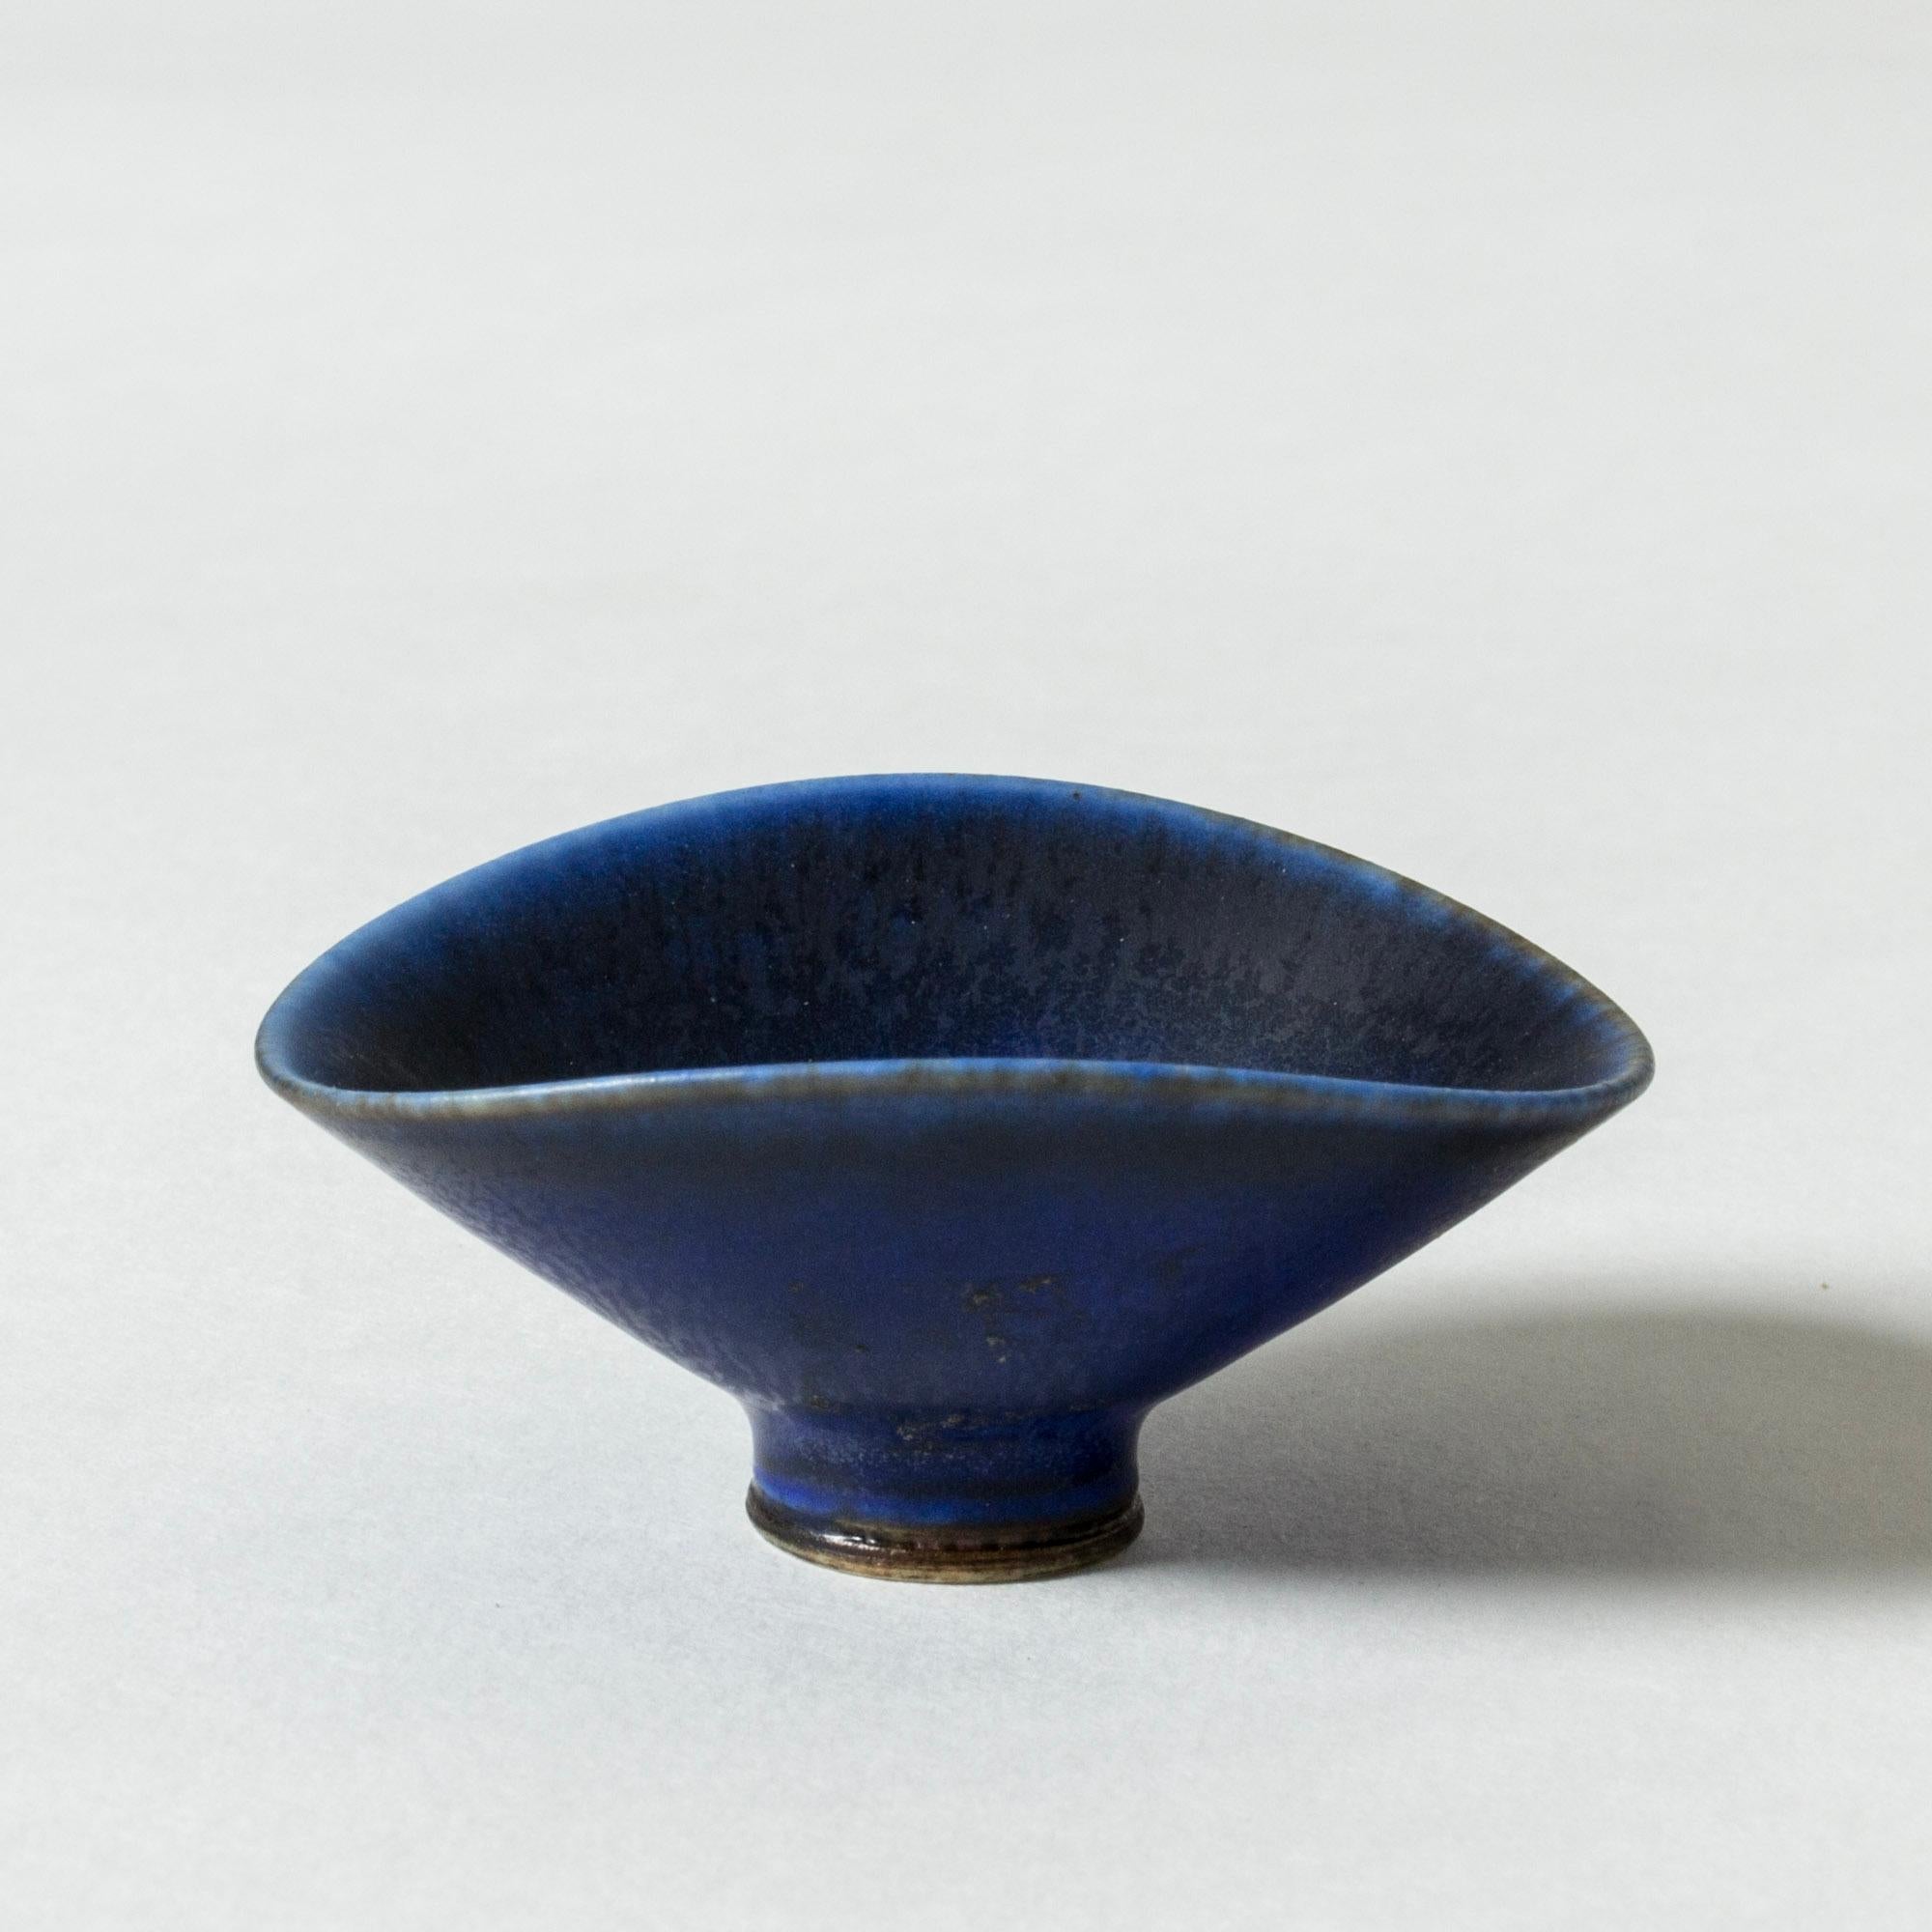 Precious miniature stoneware bowl by Berndt Friberg in an oval form, blue hare’s fur glaze.

Berndt Friberg was a Swedish ceramicist, renowned for his stoneware vases and vessels for Gustavsberg. His pure, composed designs with satiny, compelling